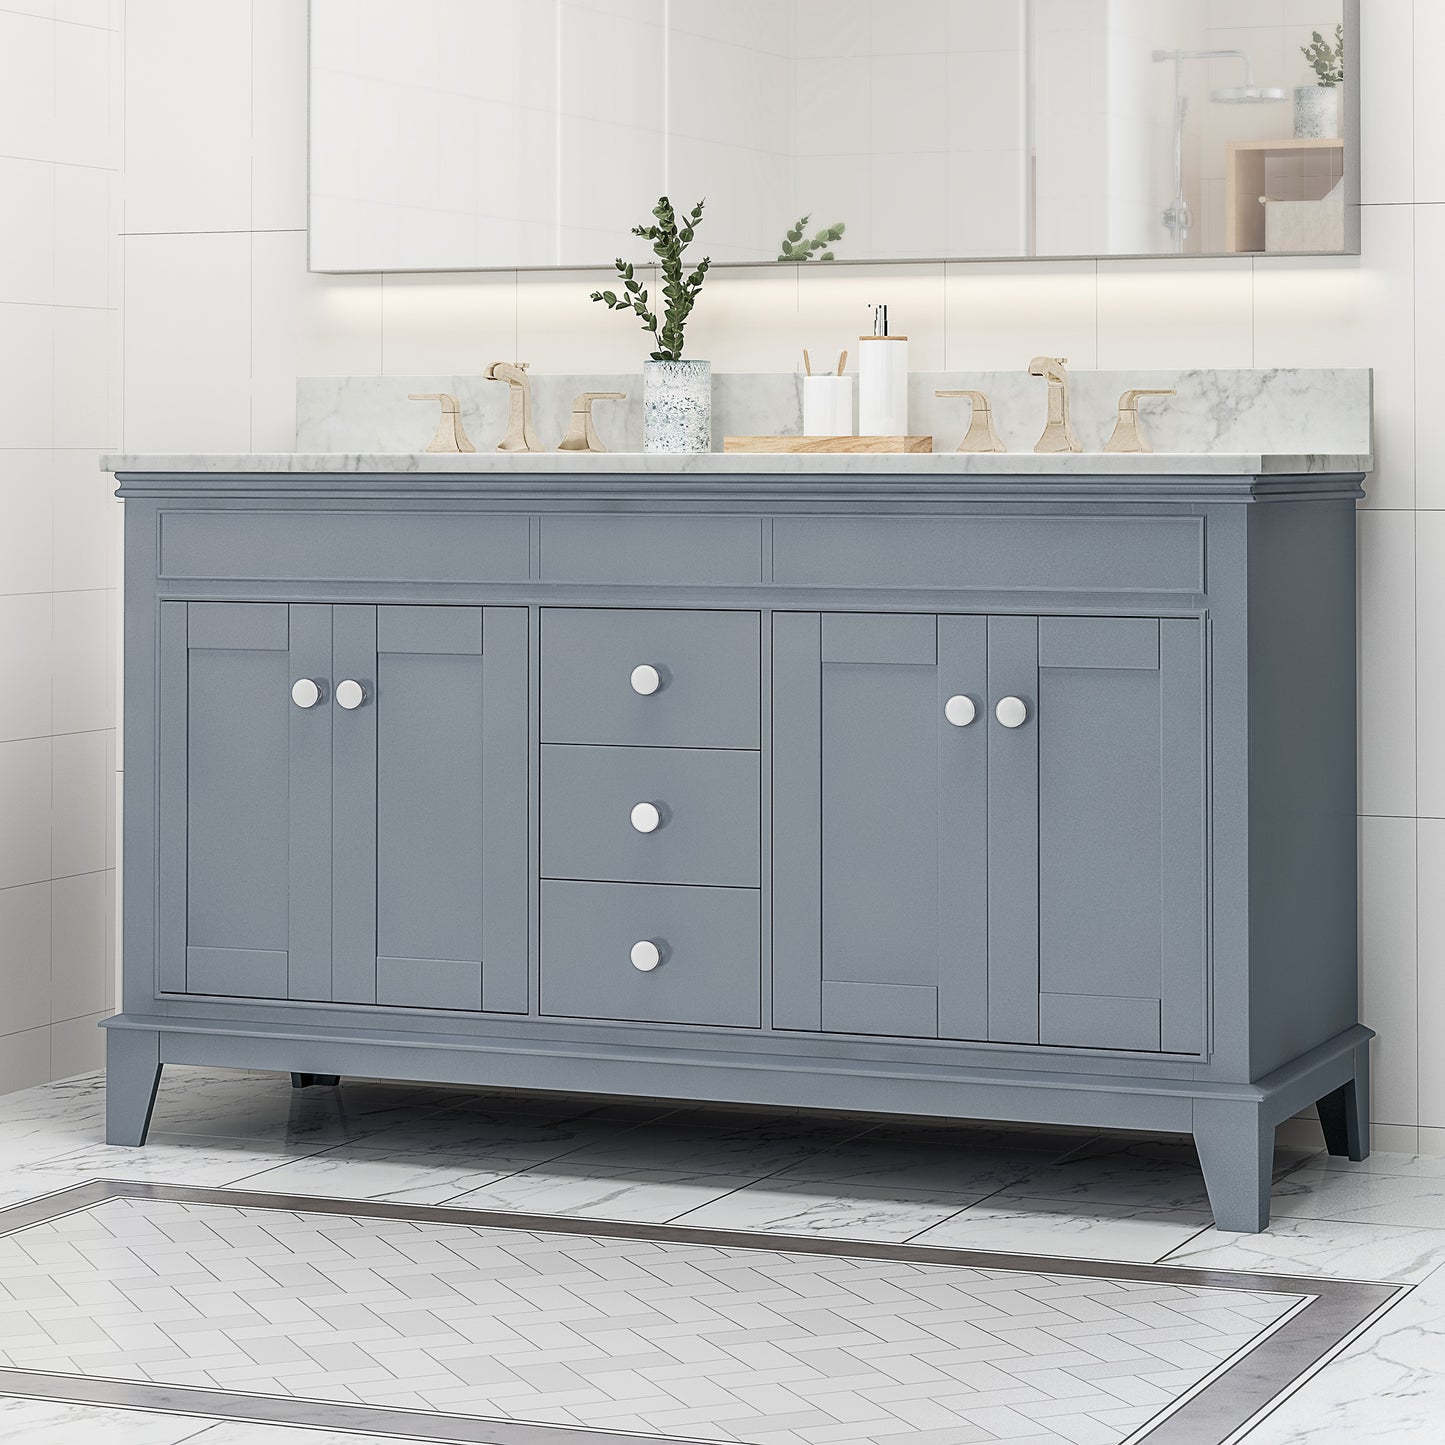 Feldspar Contemporary 60" Wood Double Sink Bathroom Vanity with Marble Counter Top with Carrara White Marble